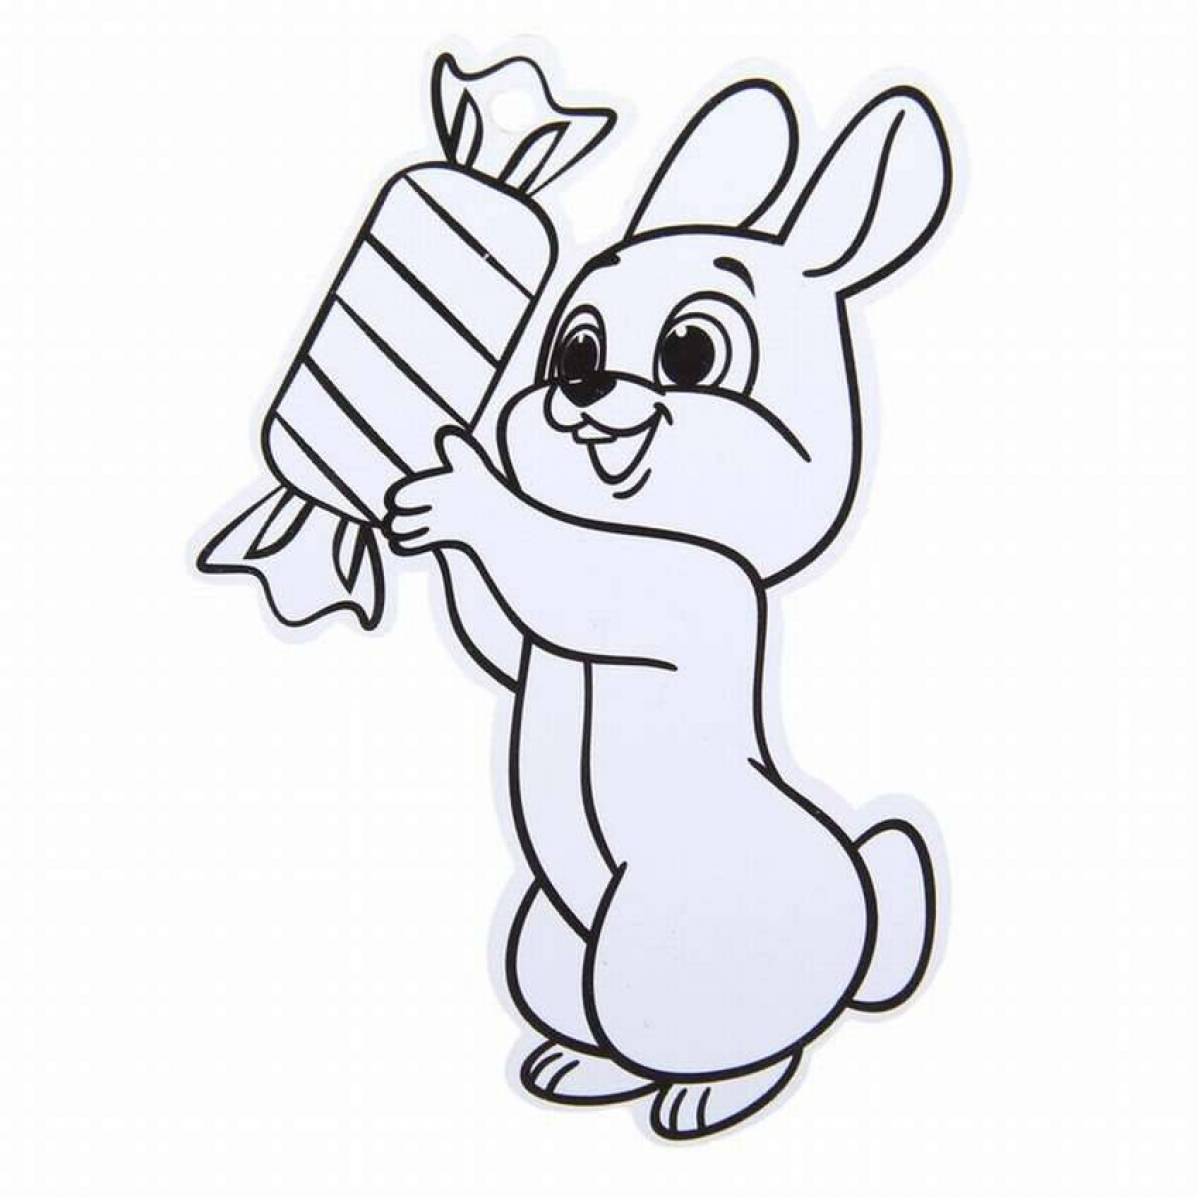 Exciting Christmas Bunny coloring book